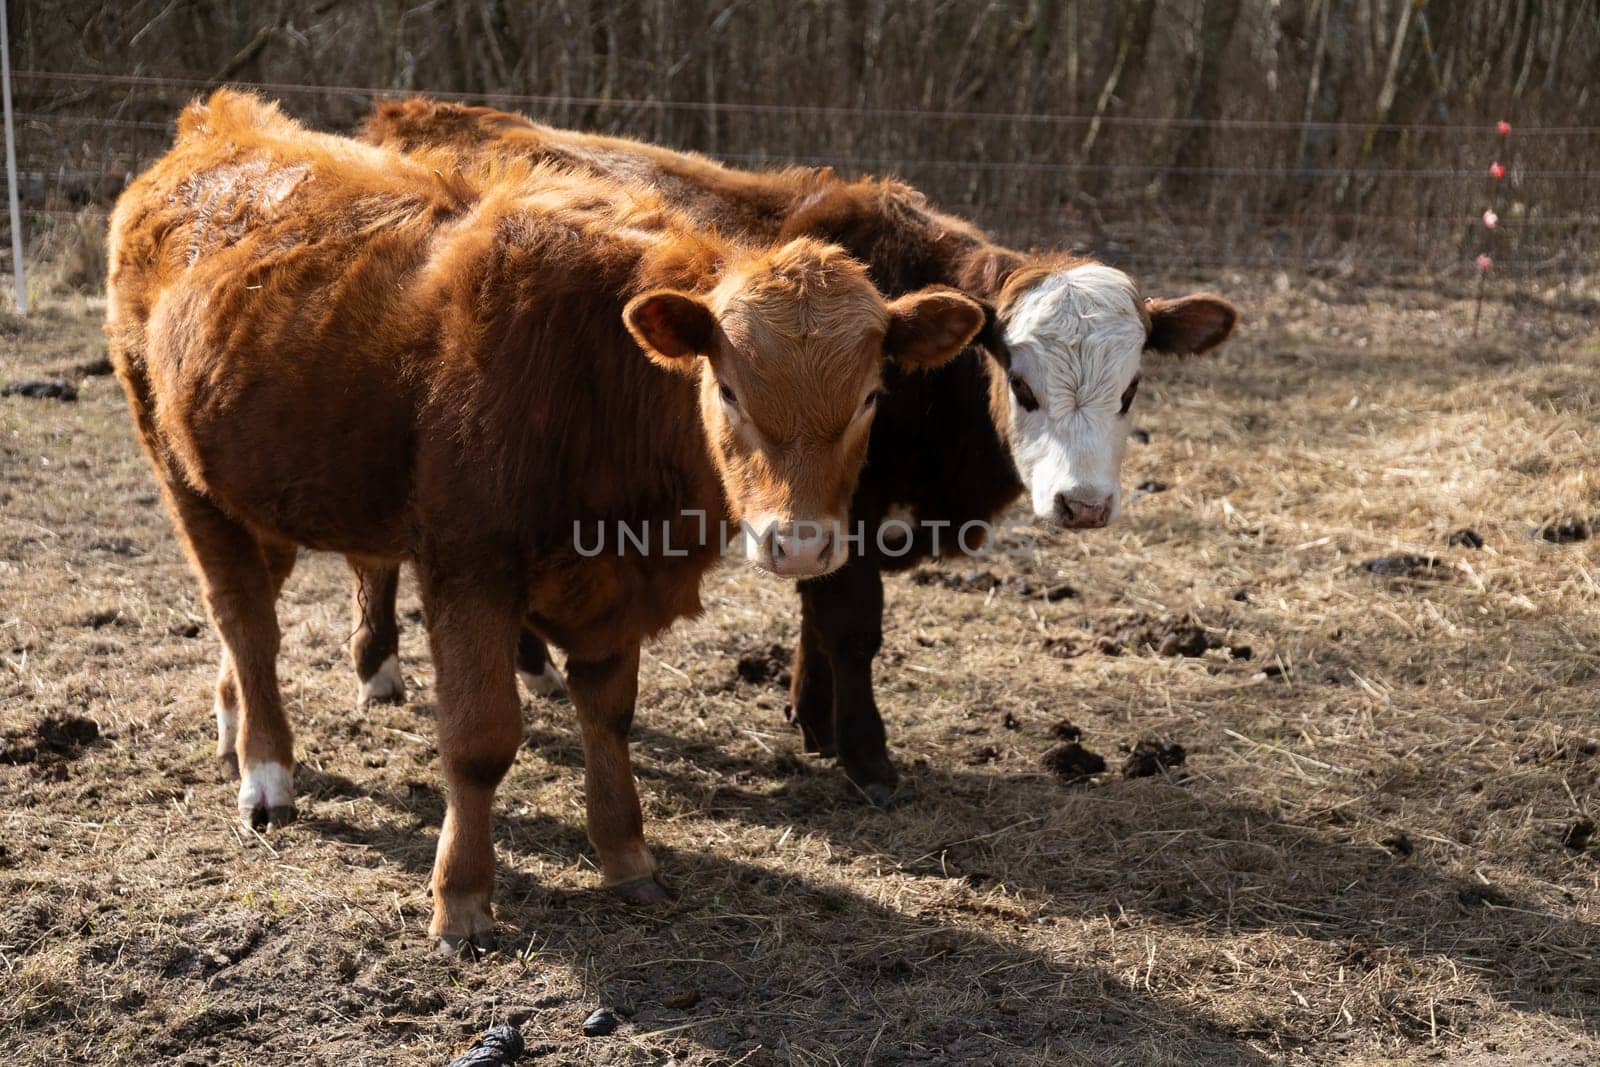 Two cows are standing on top of a dry grass field. The cows are calmly grazing on the withered grass under the clear sky.